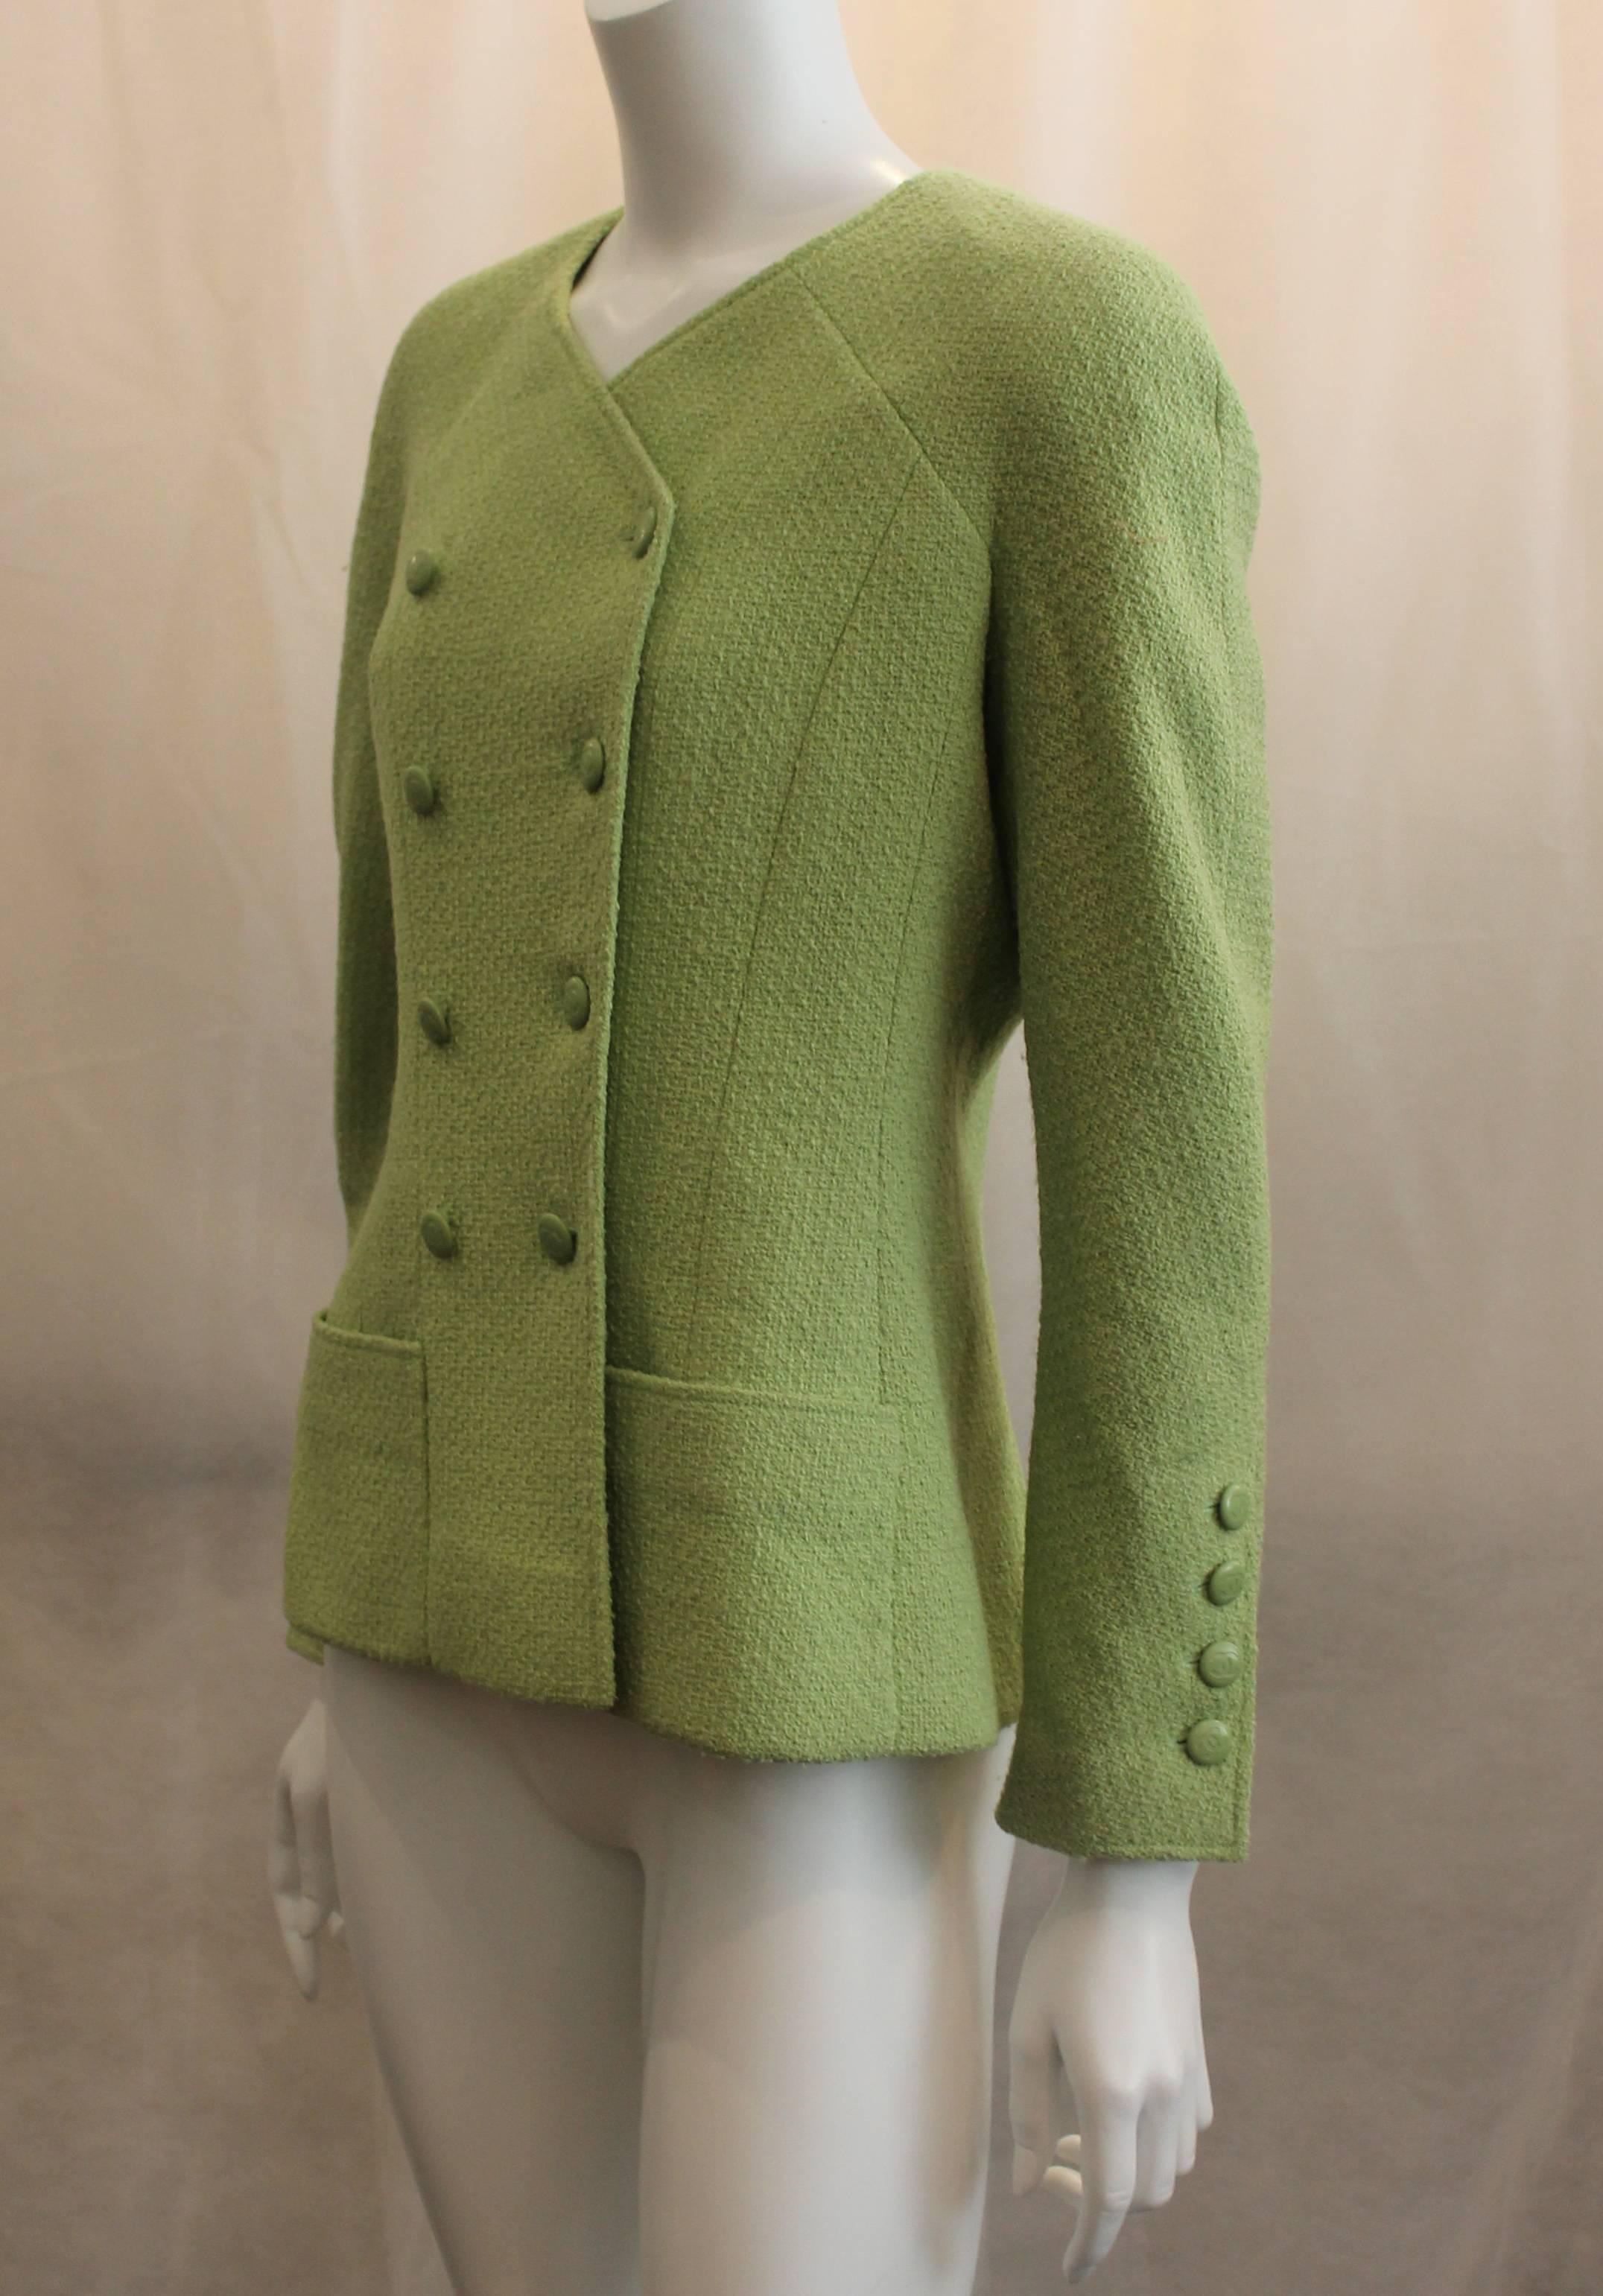 Chanel Lime Wool Double Breasted Jacket - Sz 38-Circa 96A  This beautiful double breasted classic piece has logo enamel buttons, 2 front lower pockets, 4 functional button holes on sleeve. This jacket is in very good condition.